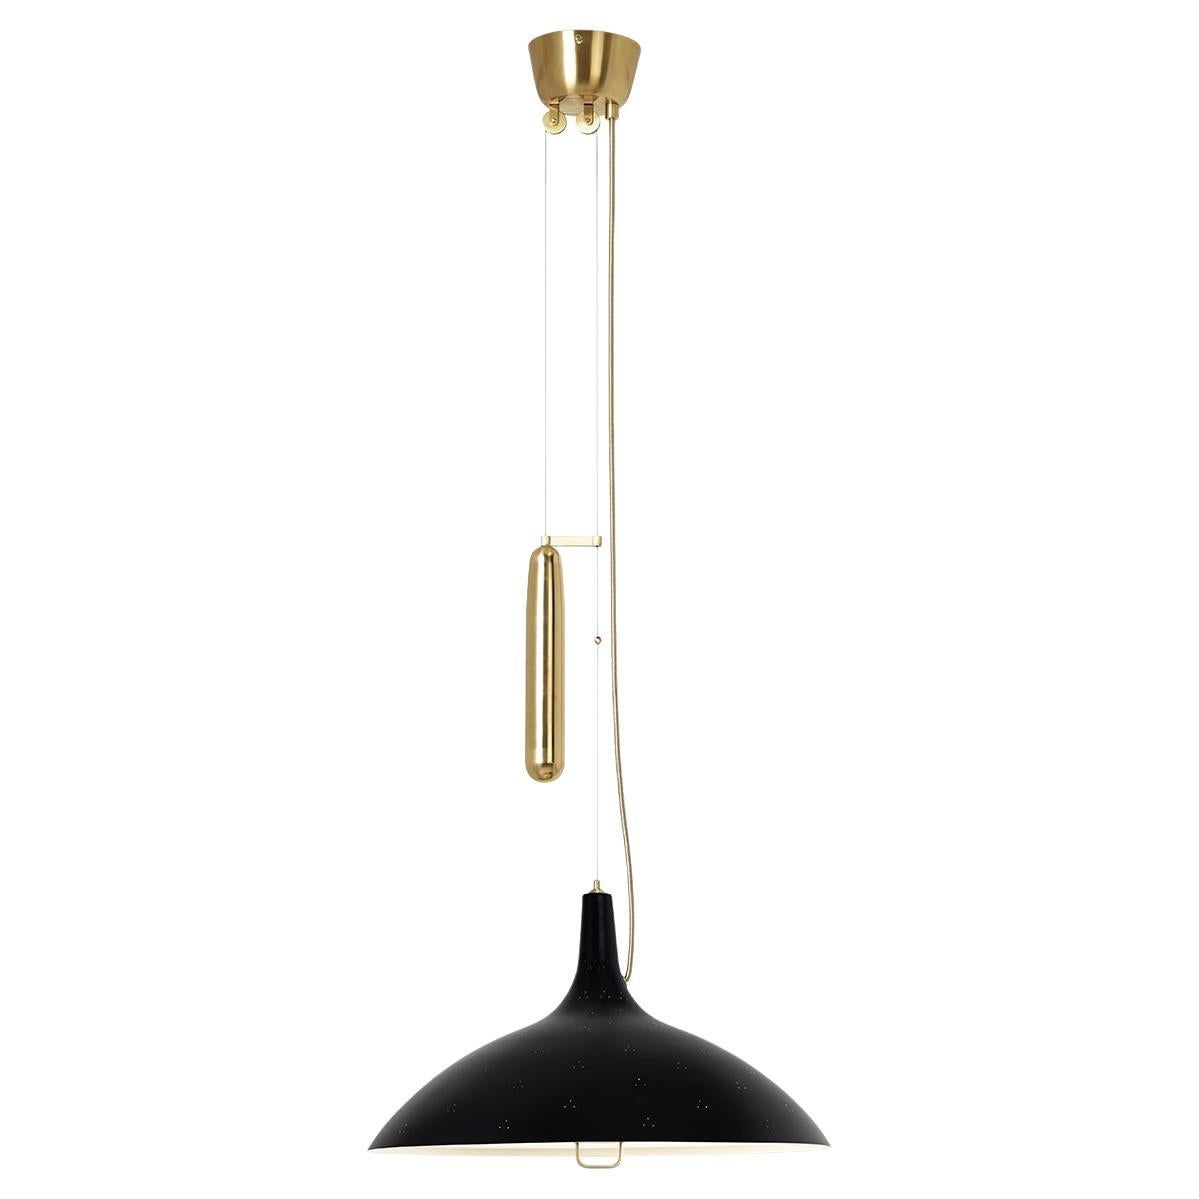 Unveiled in 1947 at the Finland House in New York, the A1965 Pendant was an instant success for Paavo Tynell and one of the lighting fixtures considered to define his mid-century peak. It delicately holds some of his most distinctive design traits;